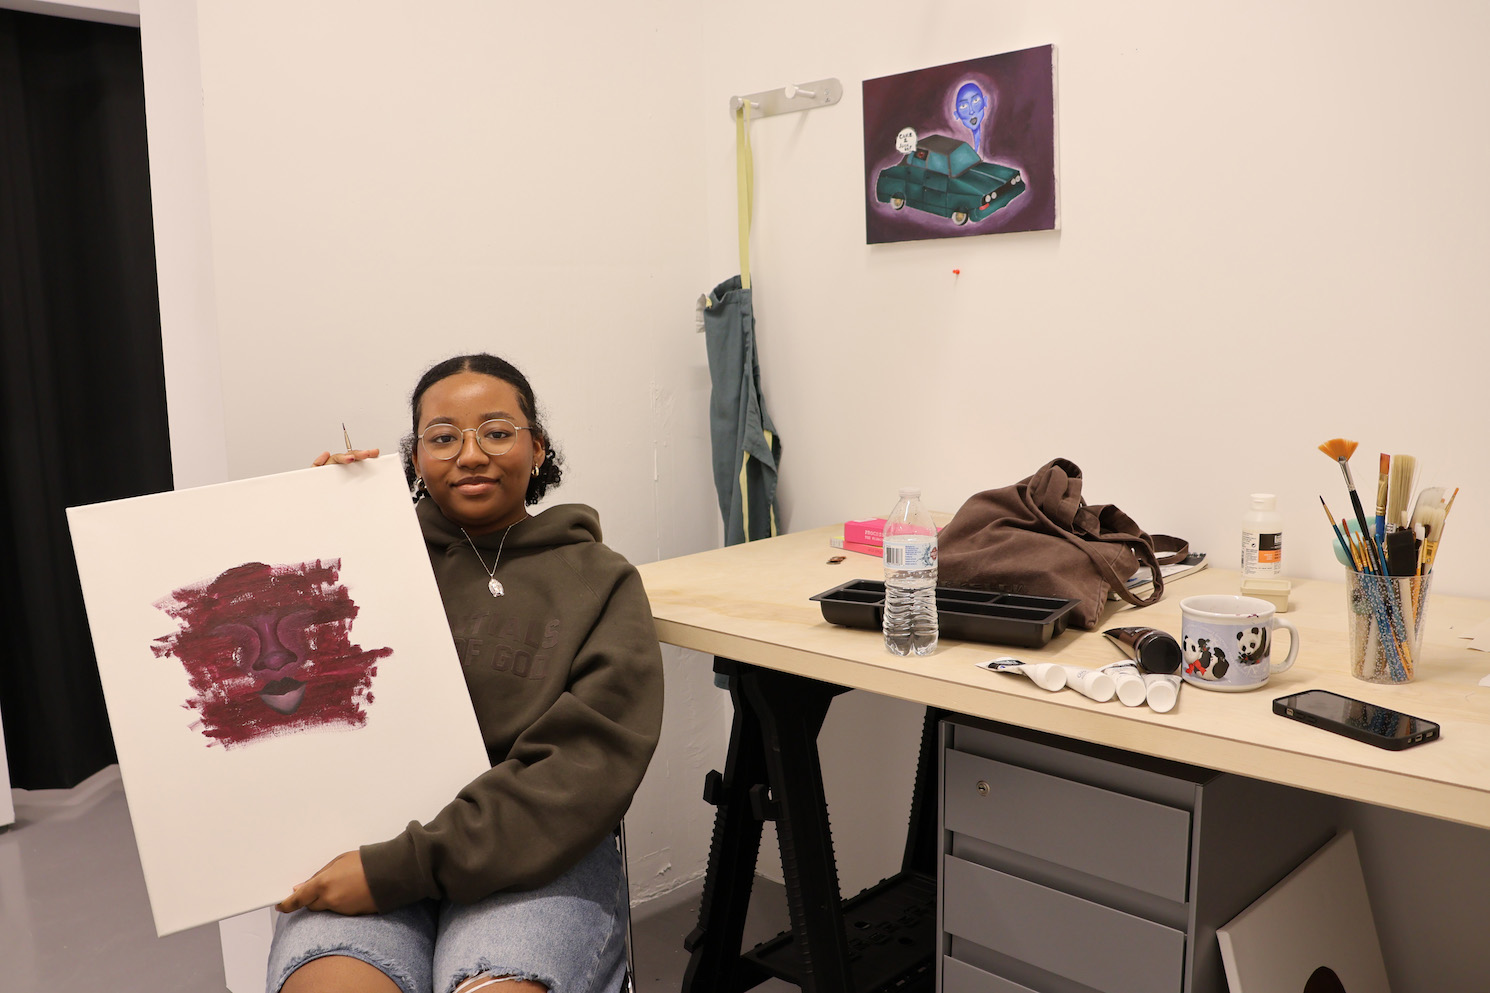 Keydi Alvarez, wearing a dark brown hoodie, holds a piece of painting. The painting depicts an illustration of a face in dark red. Behind Keydi is a desk with a dark gray drawer at the bottom. On the table are holder for paints and brushes and a brown tote bag.